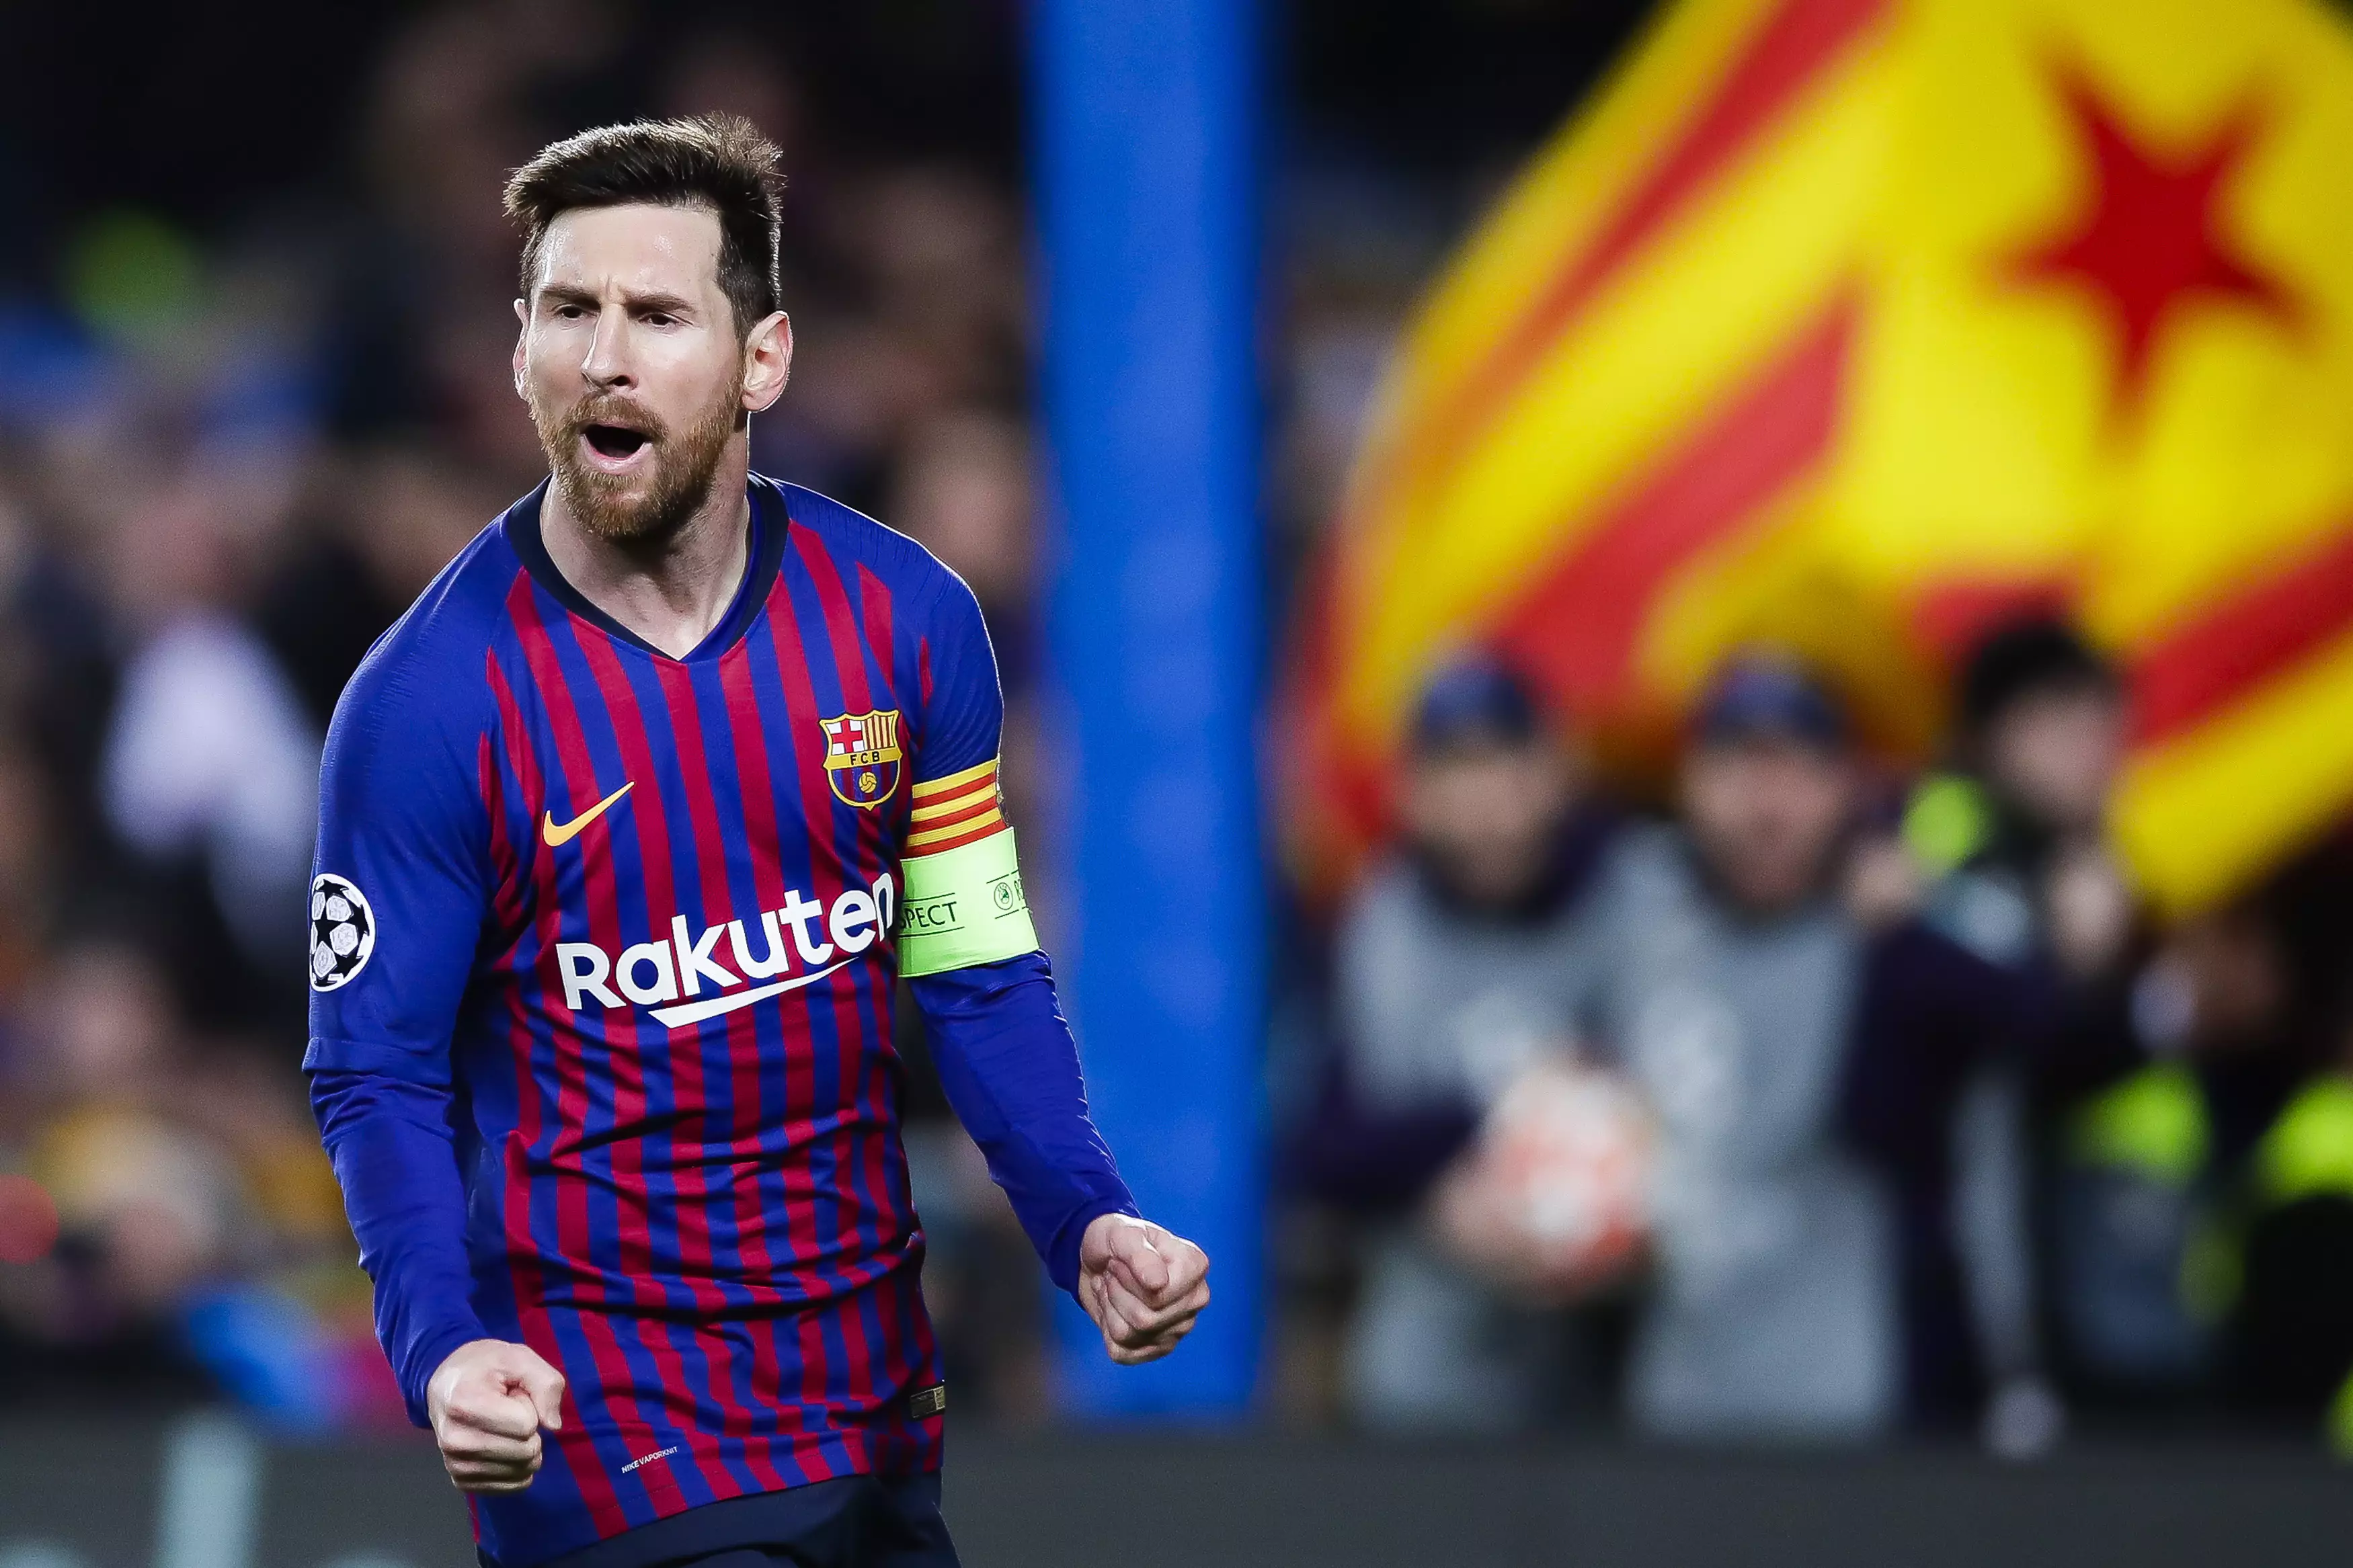 Sports Scientist Analyses Lionel Messi's Incredible Stats For Barcelona